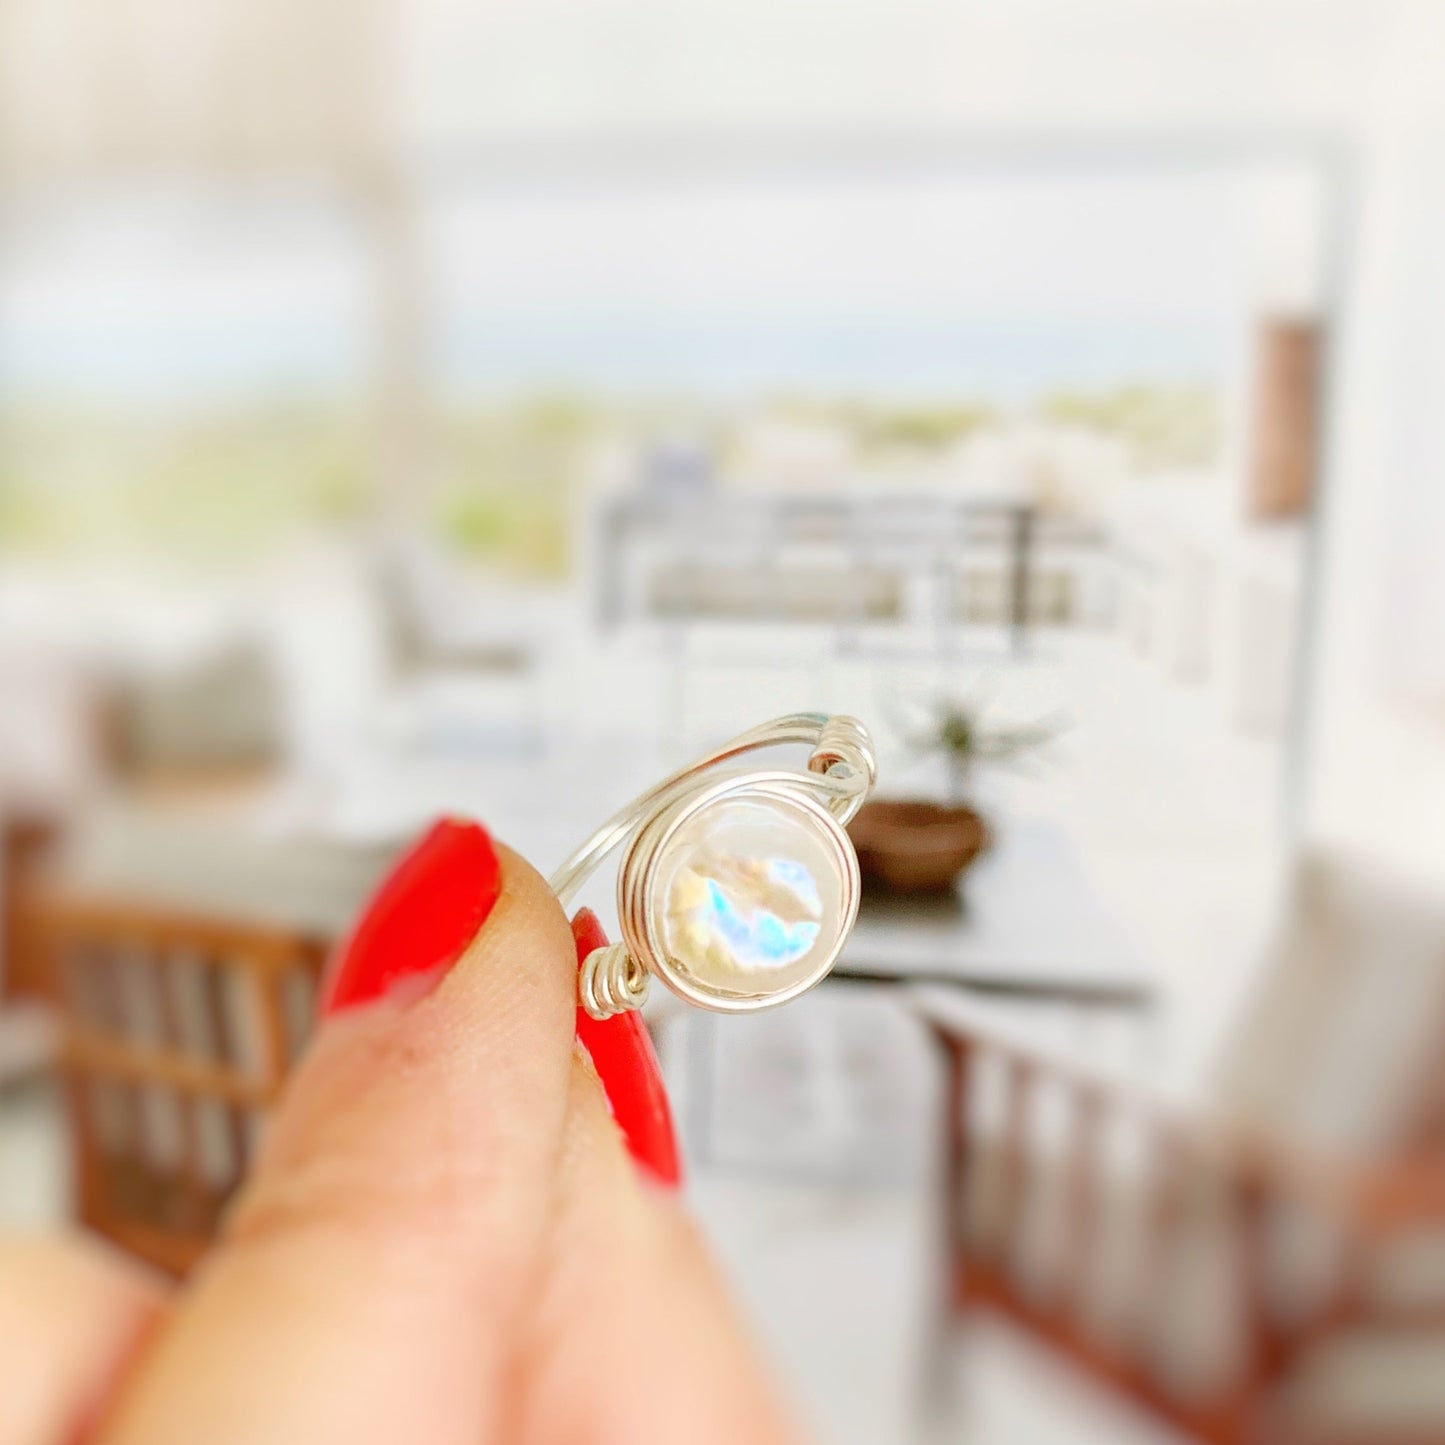 the newport pearl ring in sterling silver by mermaids and madeleines features a freshwater white coin pearl in a wire wrap ring with sterling silver wire. the design is simple and artful. this ring is photographed held between fingers in front of a blurred living room scene